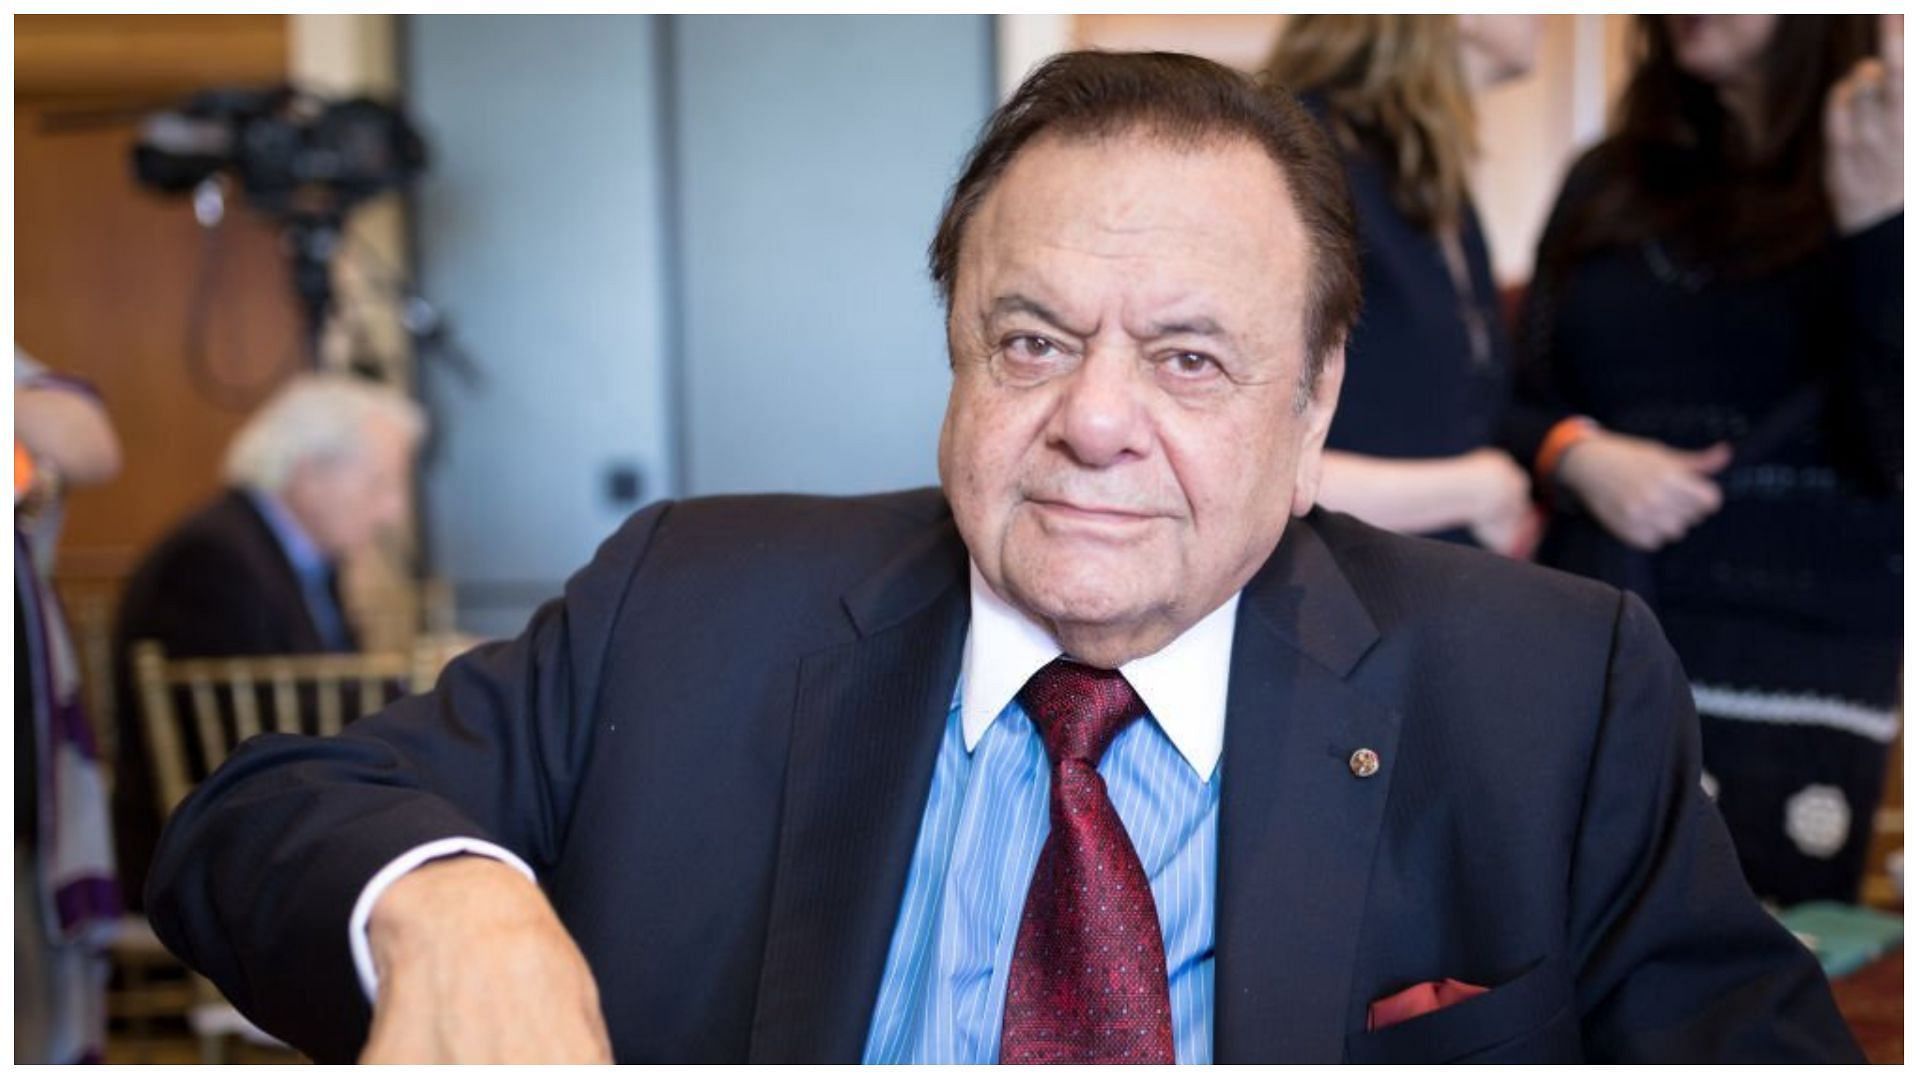 Paul Sorvino has accumulated a lot of wealth from his work as an actor (Image via Greg Doherty/Getty Images)